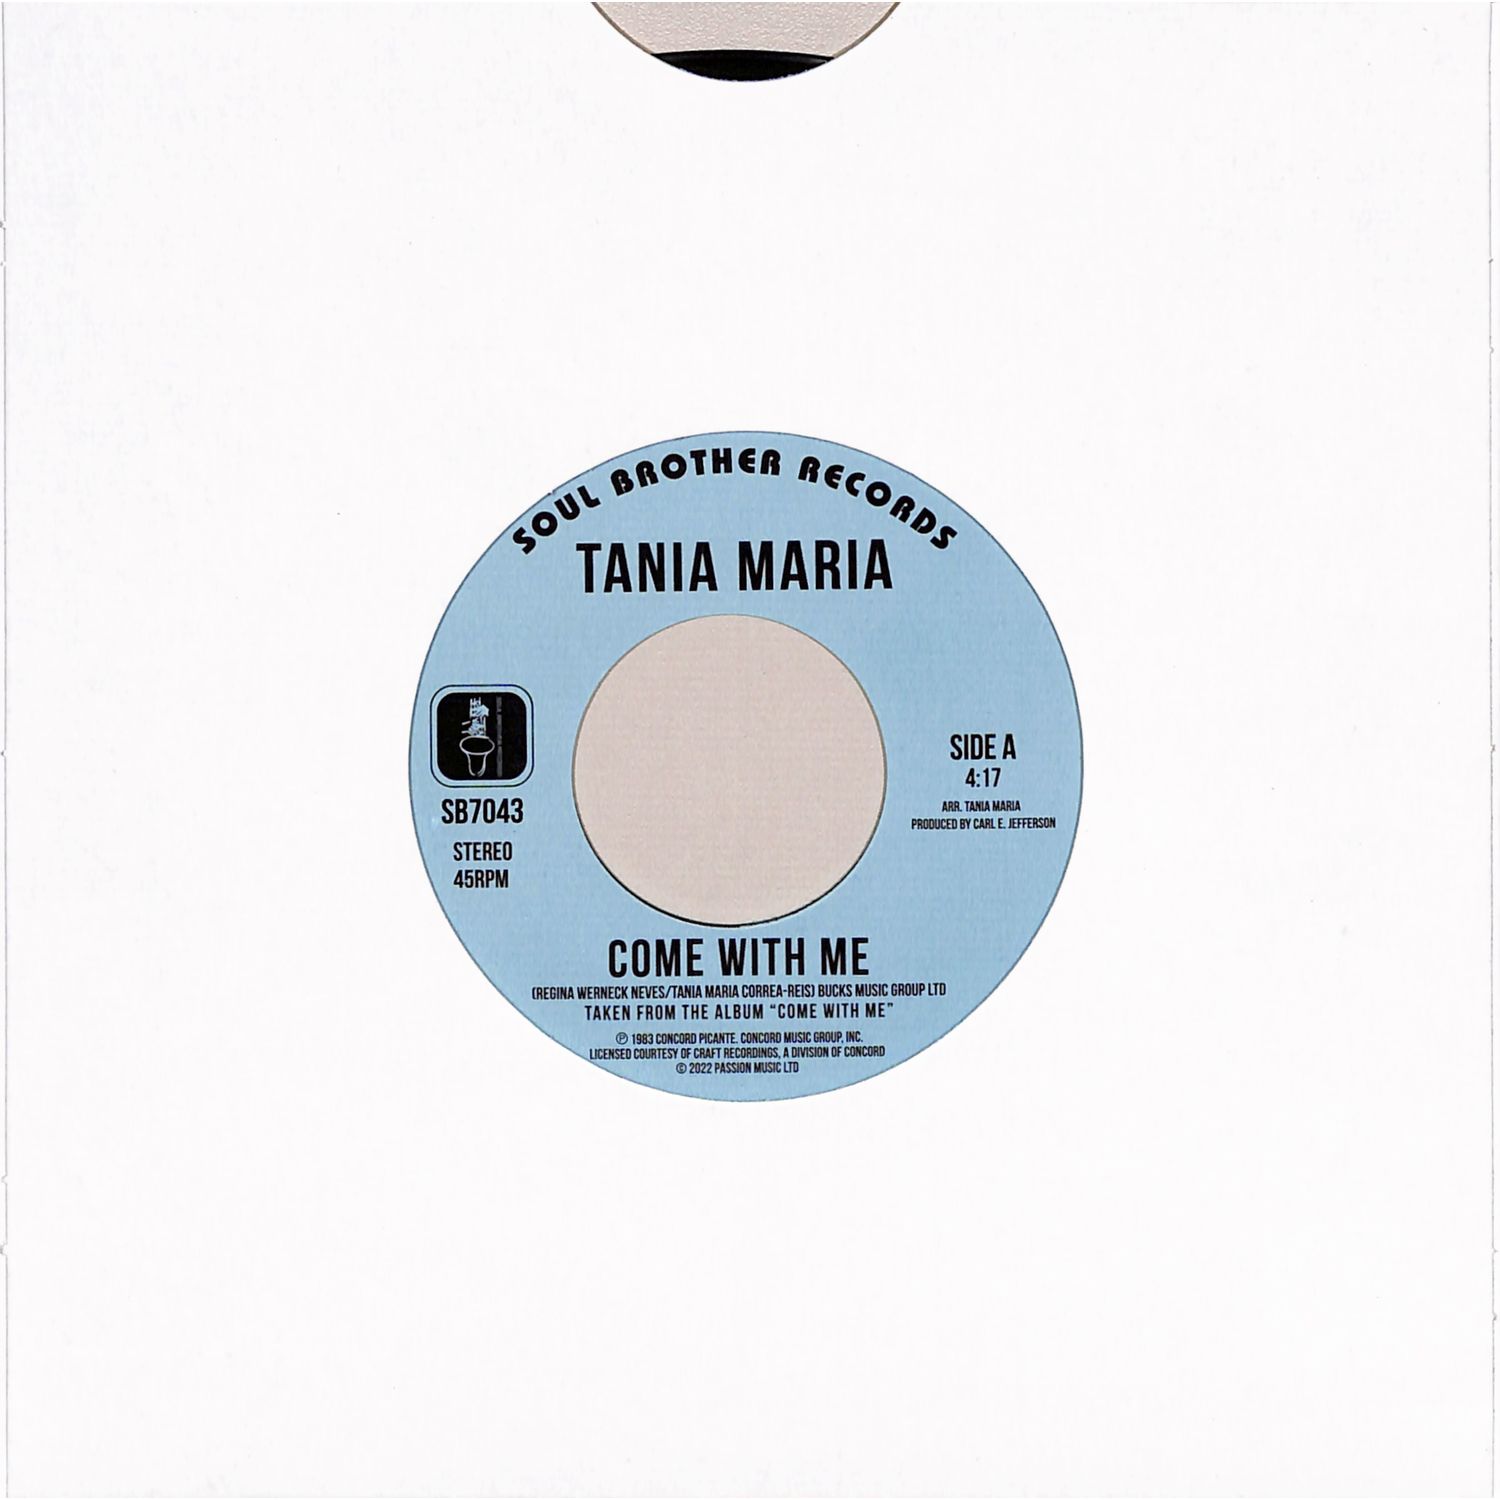 Tania Maria - COME WITH ME / LOST IN AMAZONIA 